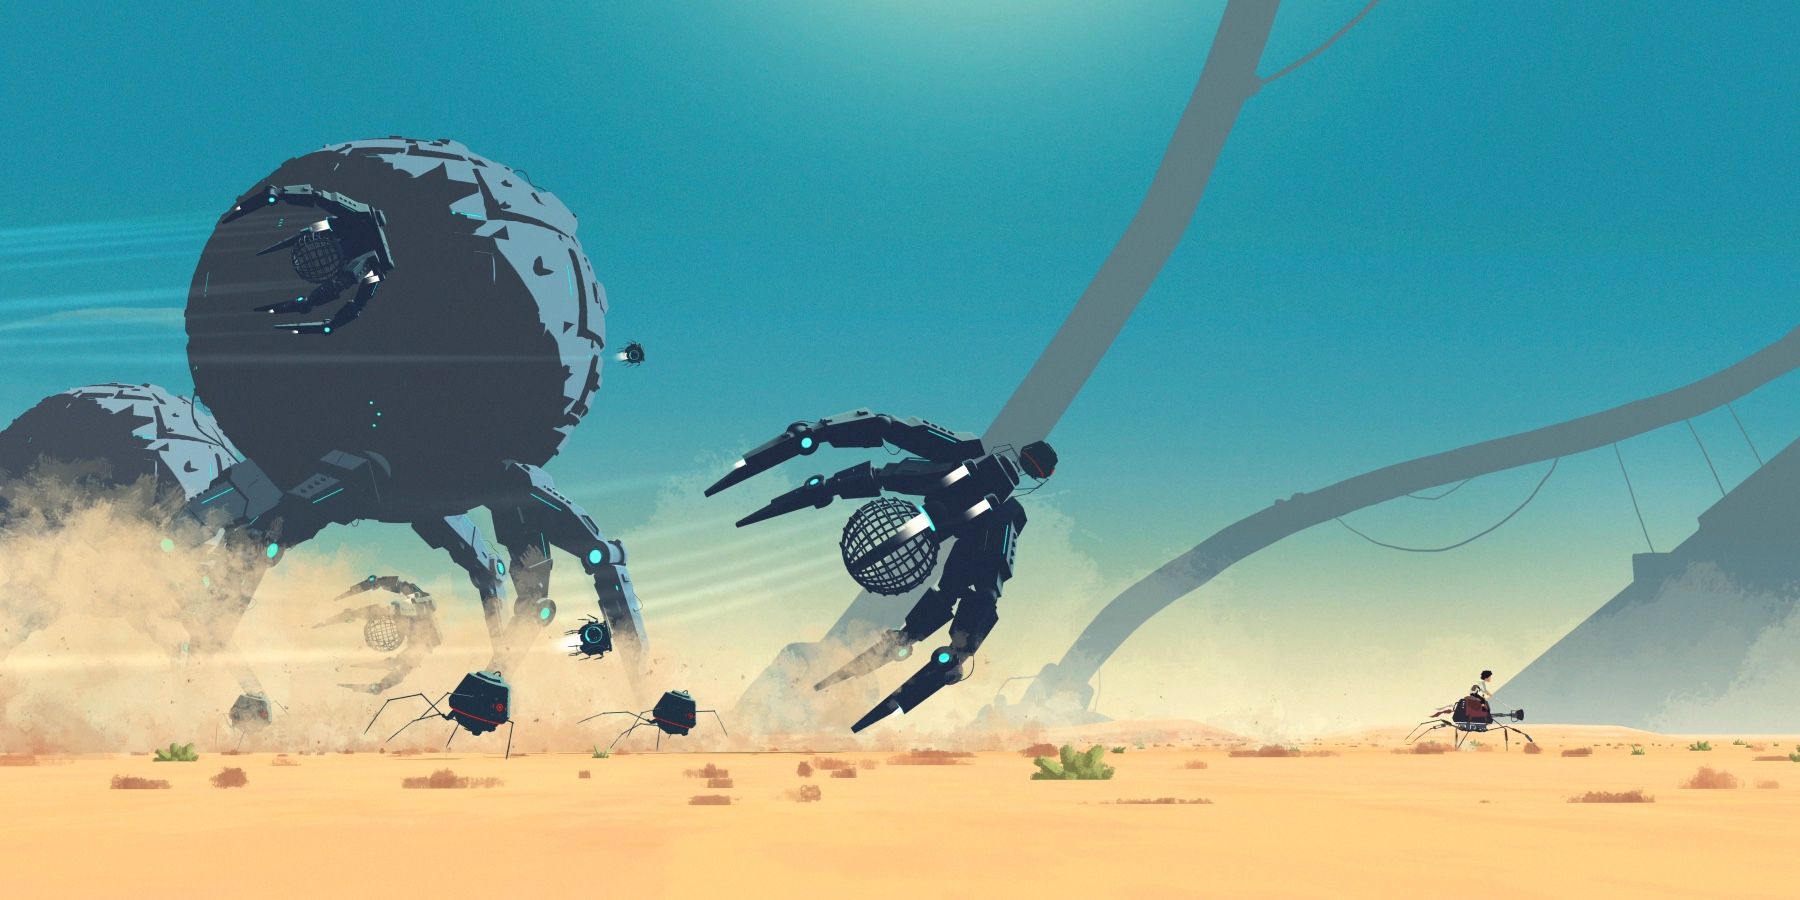 Planet of Lana chased by robots in desert